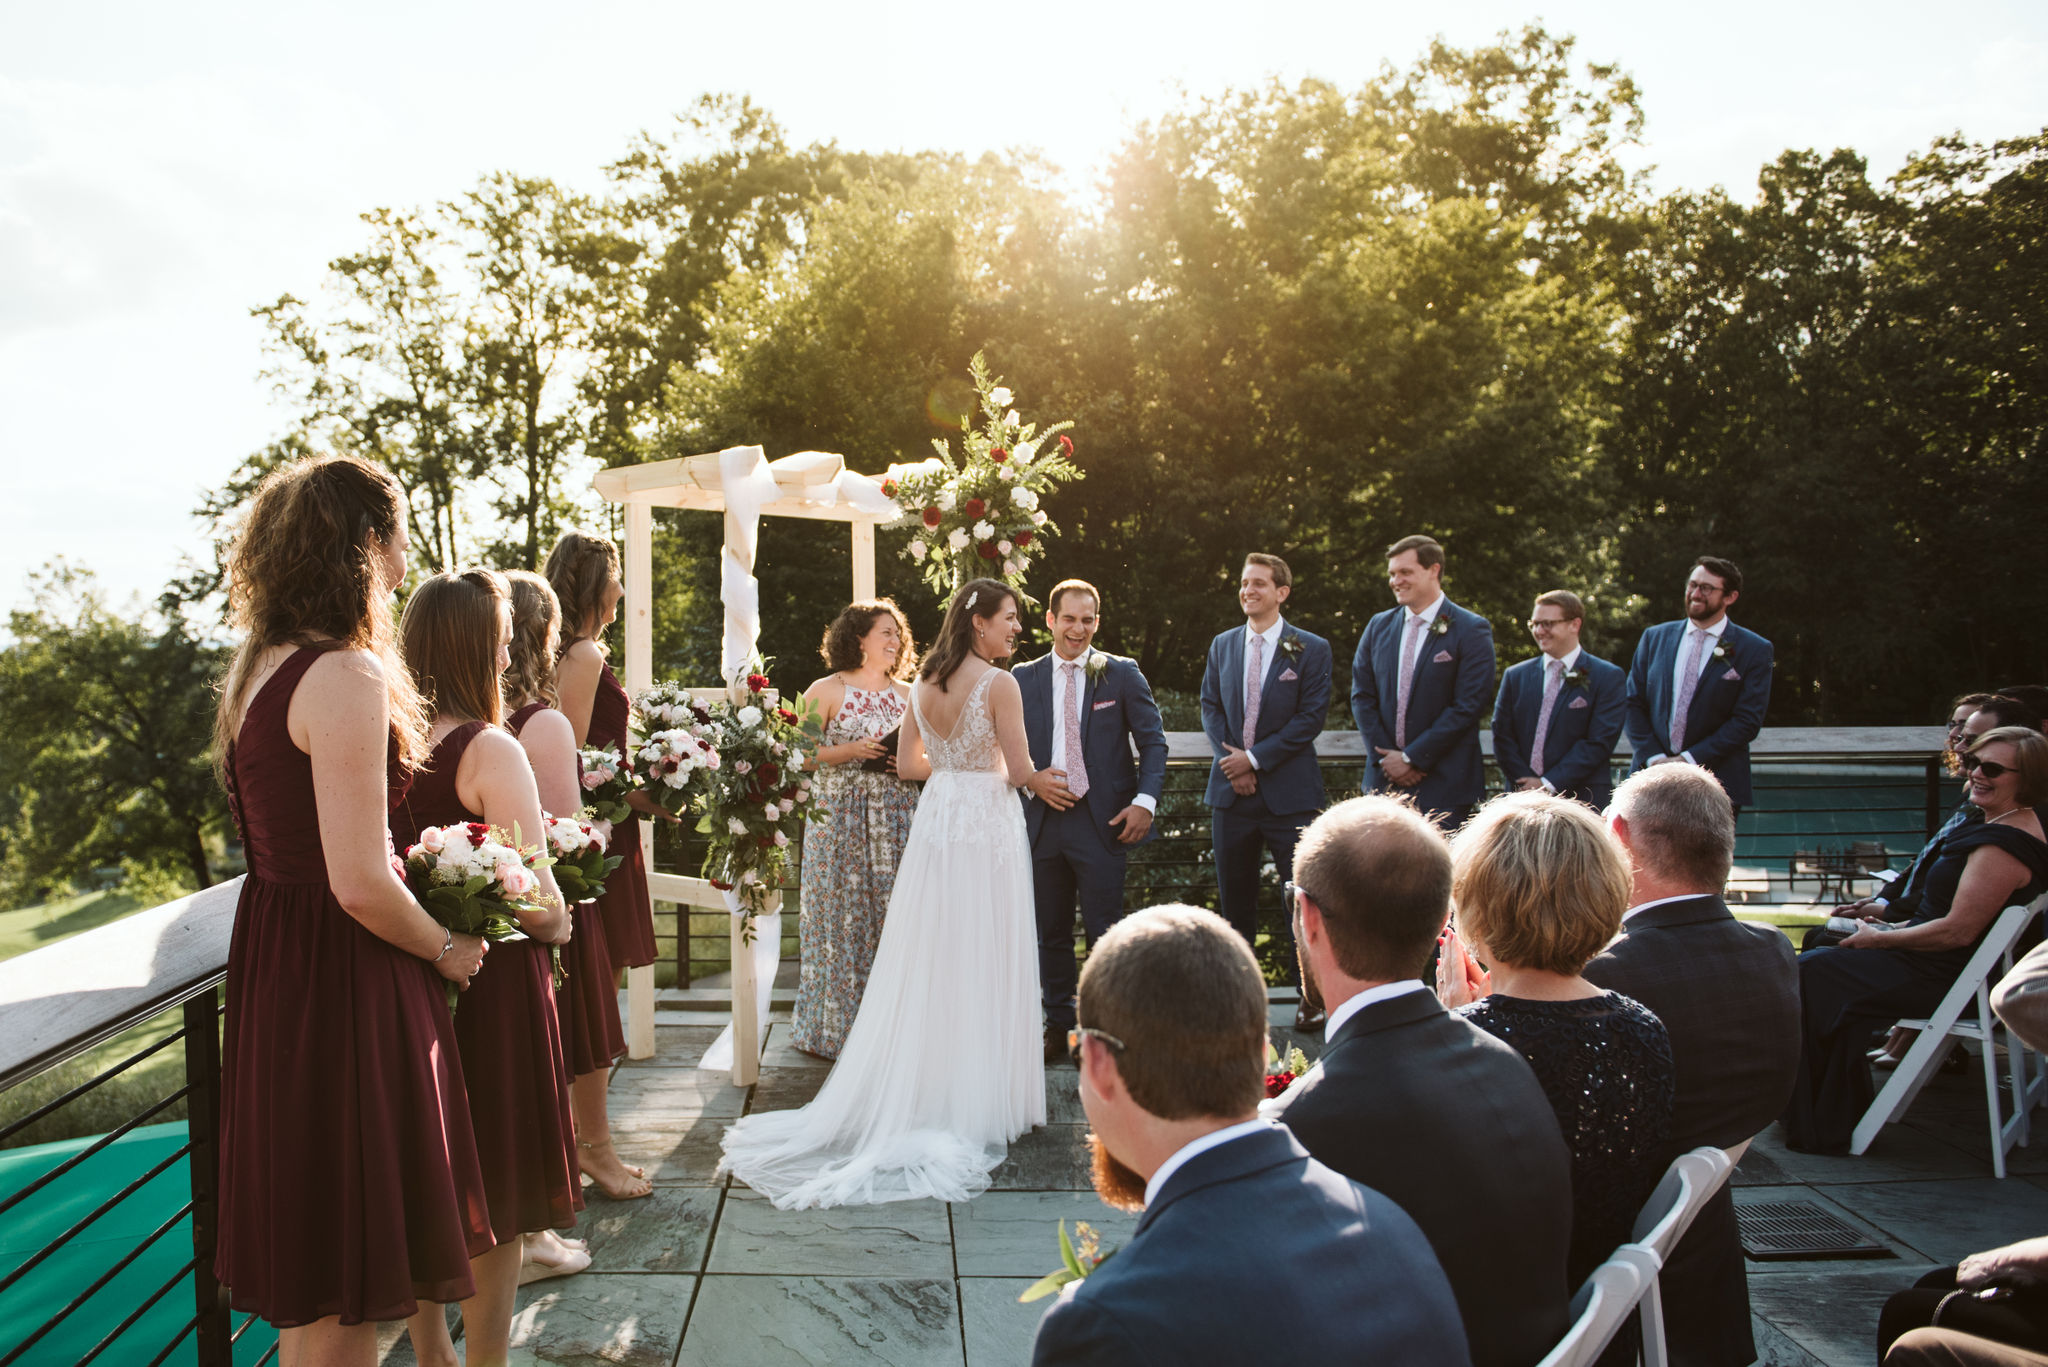  Phoenix Maryland, Baltimore Wedding Photographer, Eagle’s Nest Country Club, Classic, Romantic, Bride and Groom at Altar Surrounded by Family and Friends, BHLDN Dress 